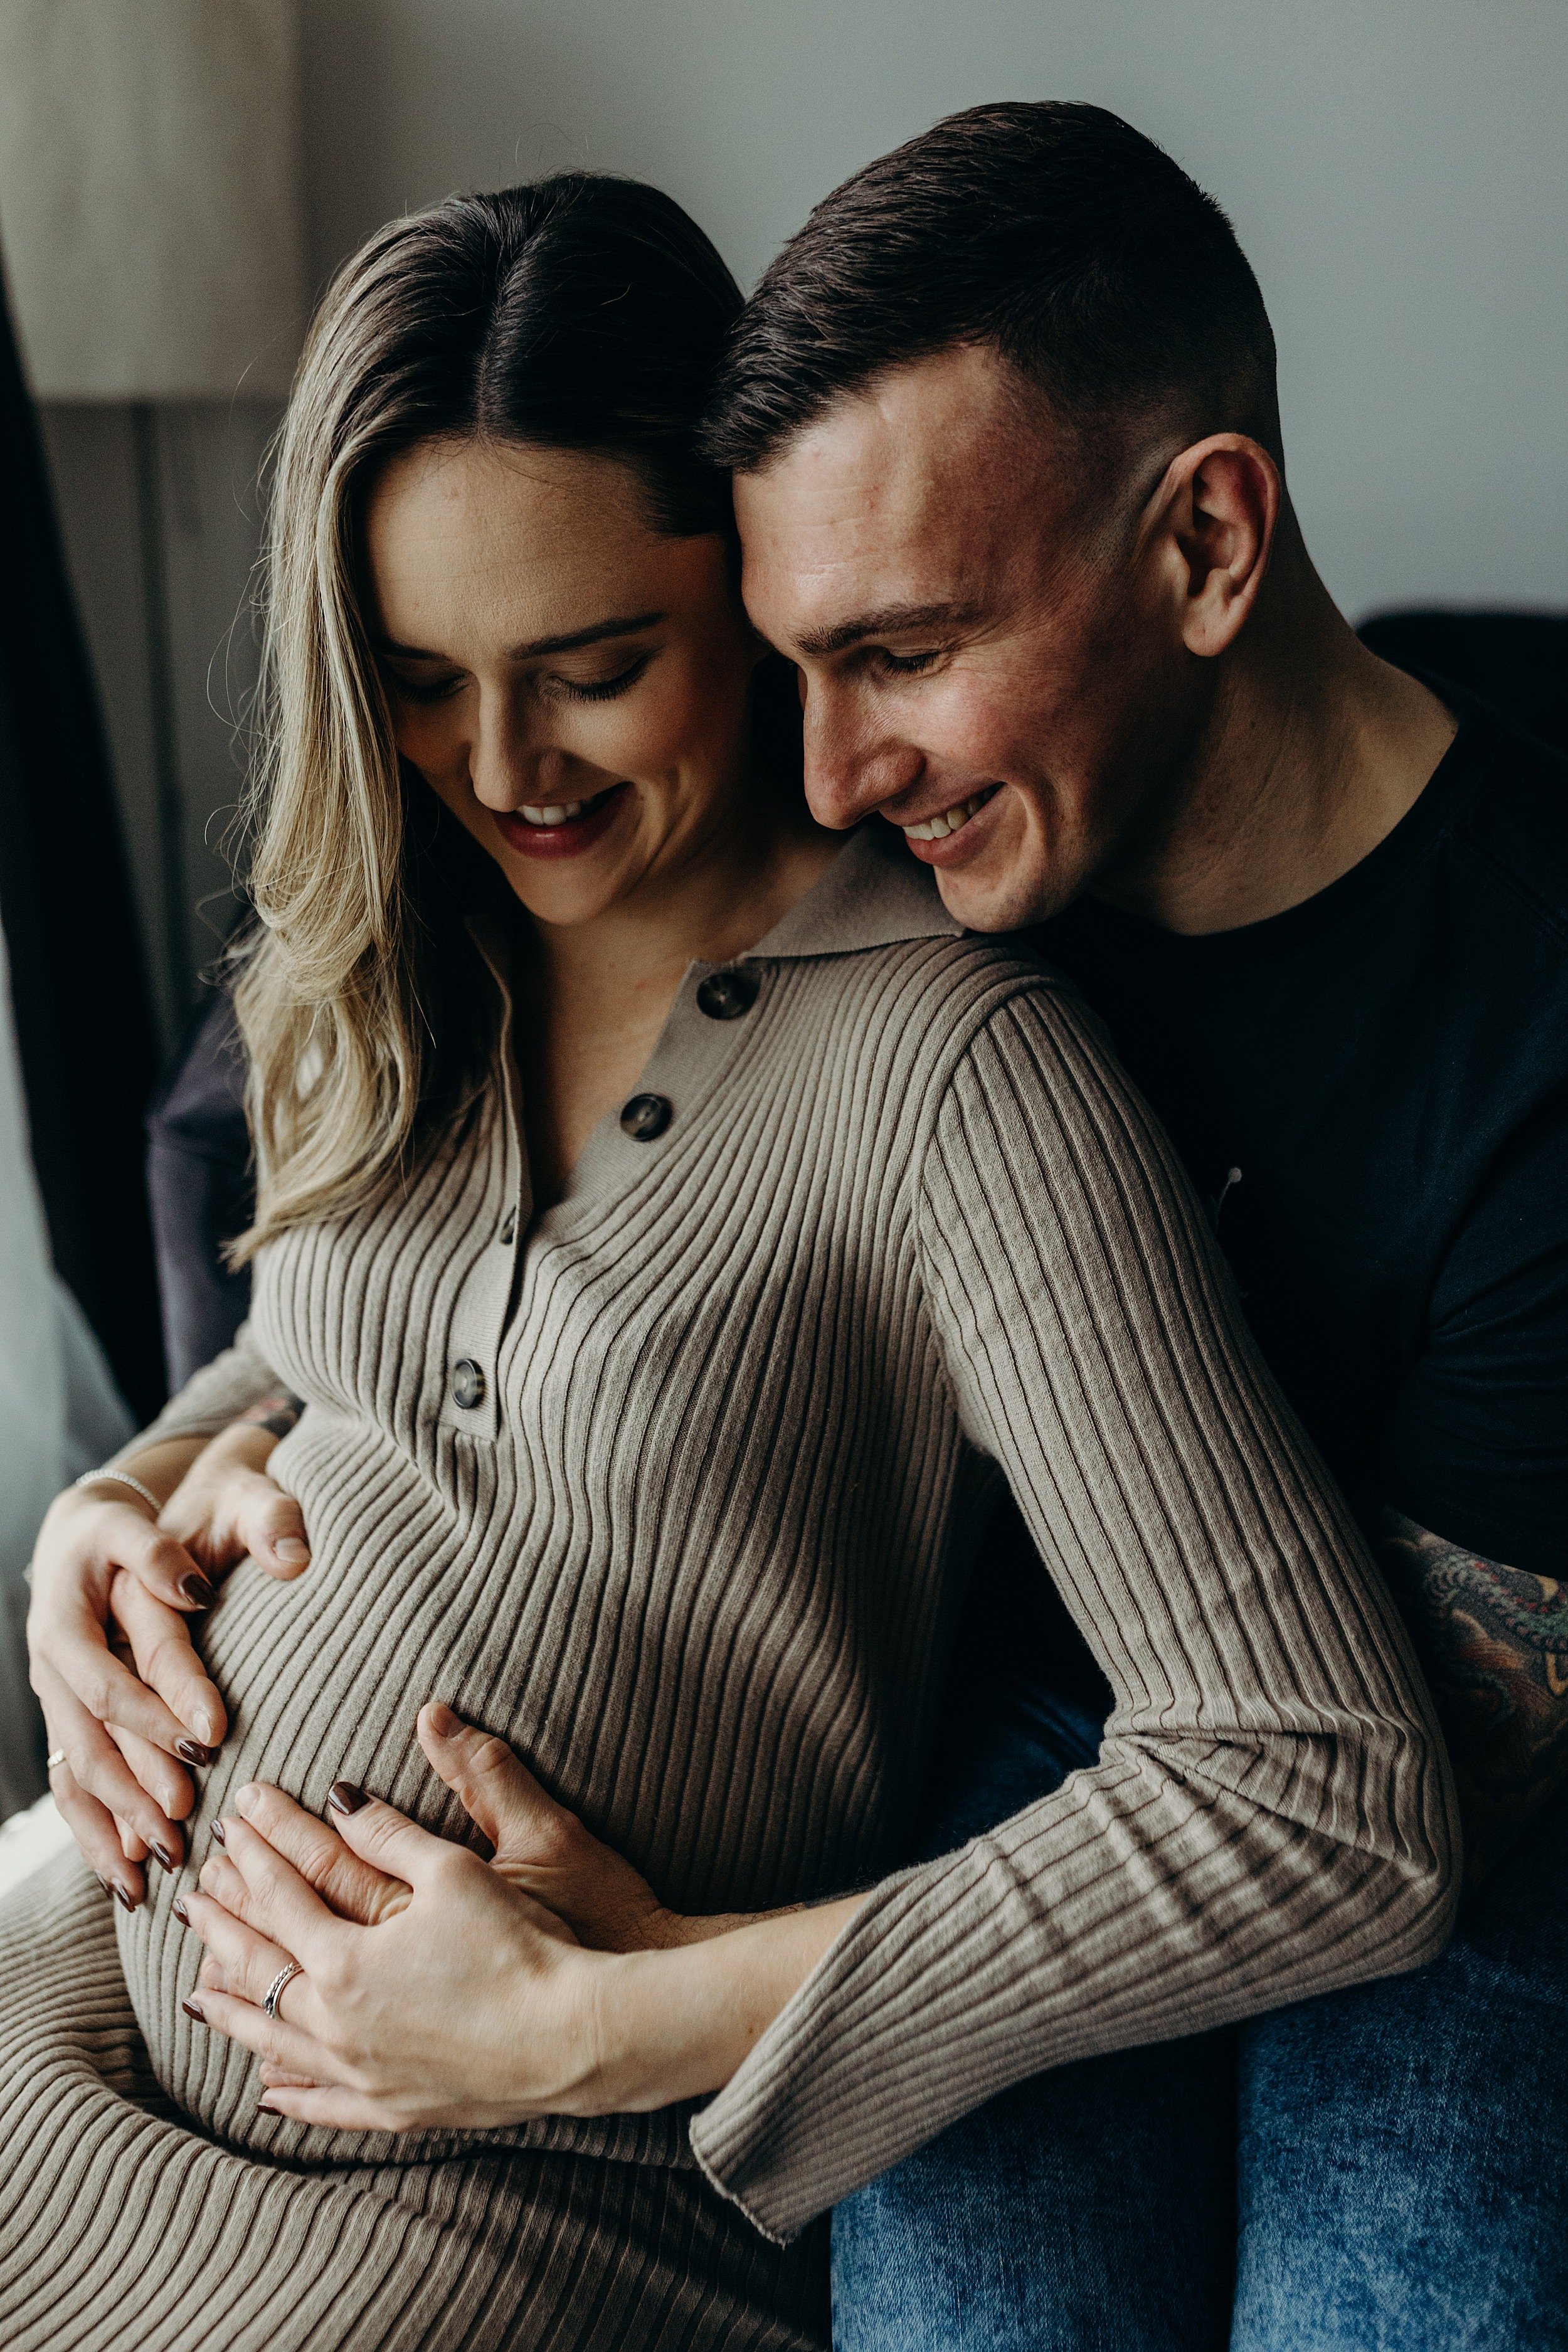 mum to be and dad to be cuddling smiling and holding baby bump during pregnancy photo session by maternity photographer glasgow